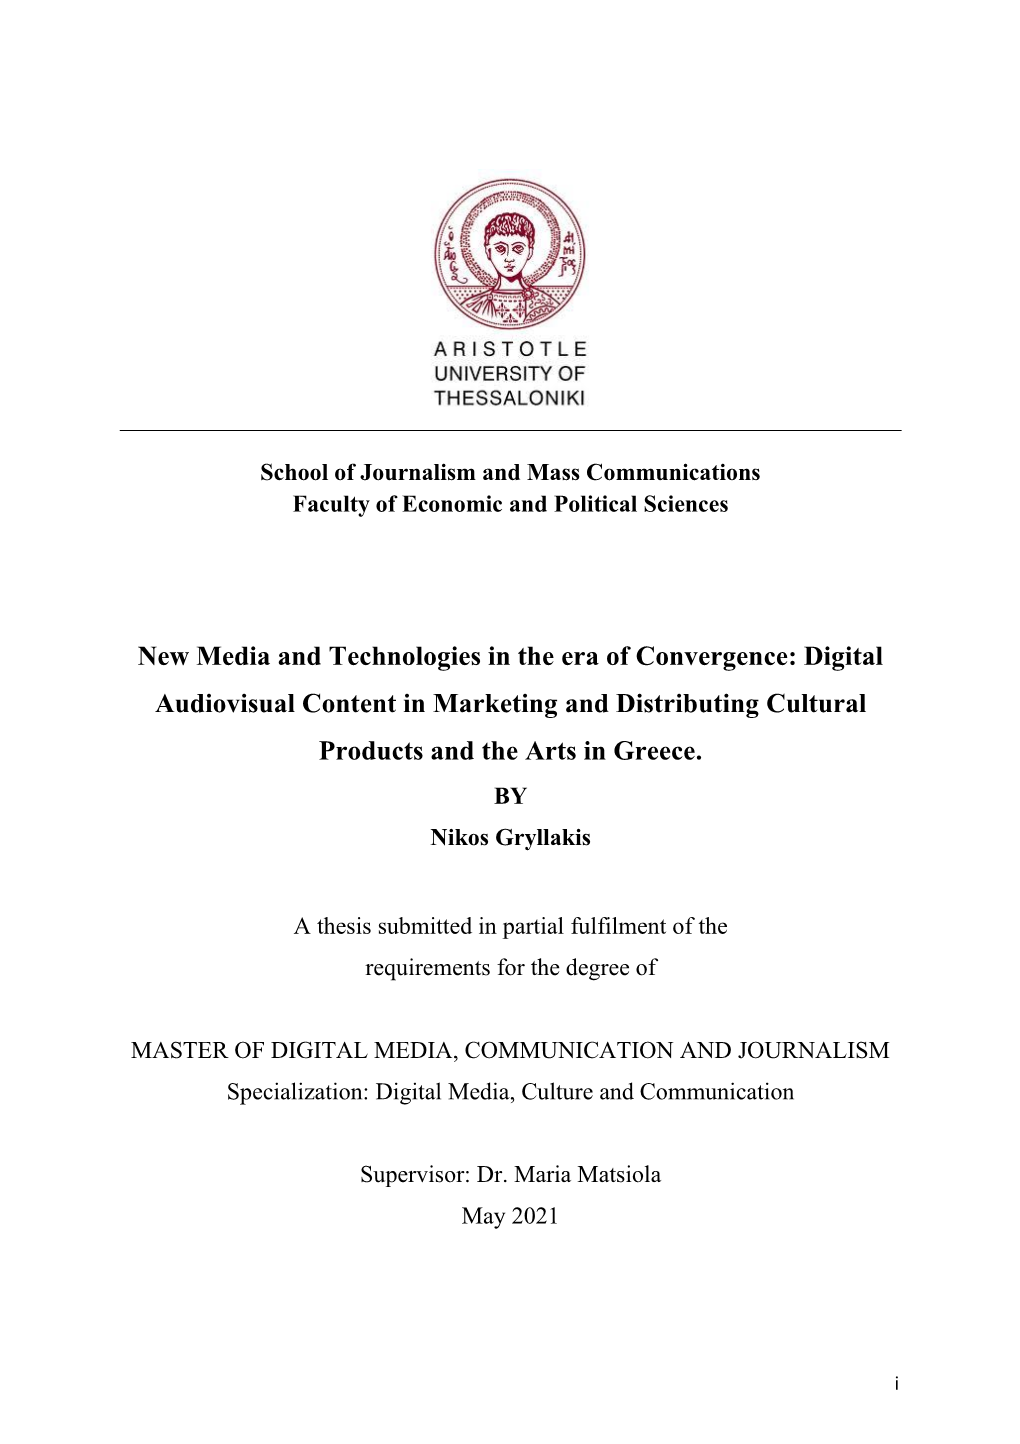 Digital Audiovisual Content in Marketing and Distributing Cultural Products and the Arts in Greece